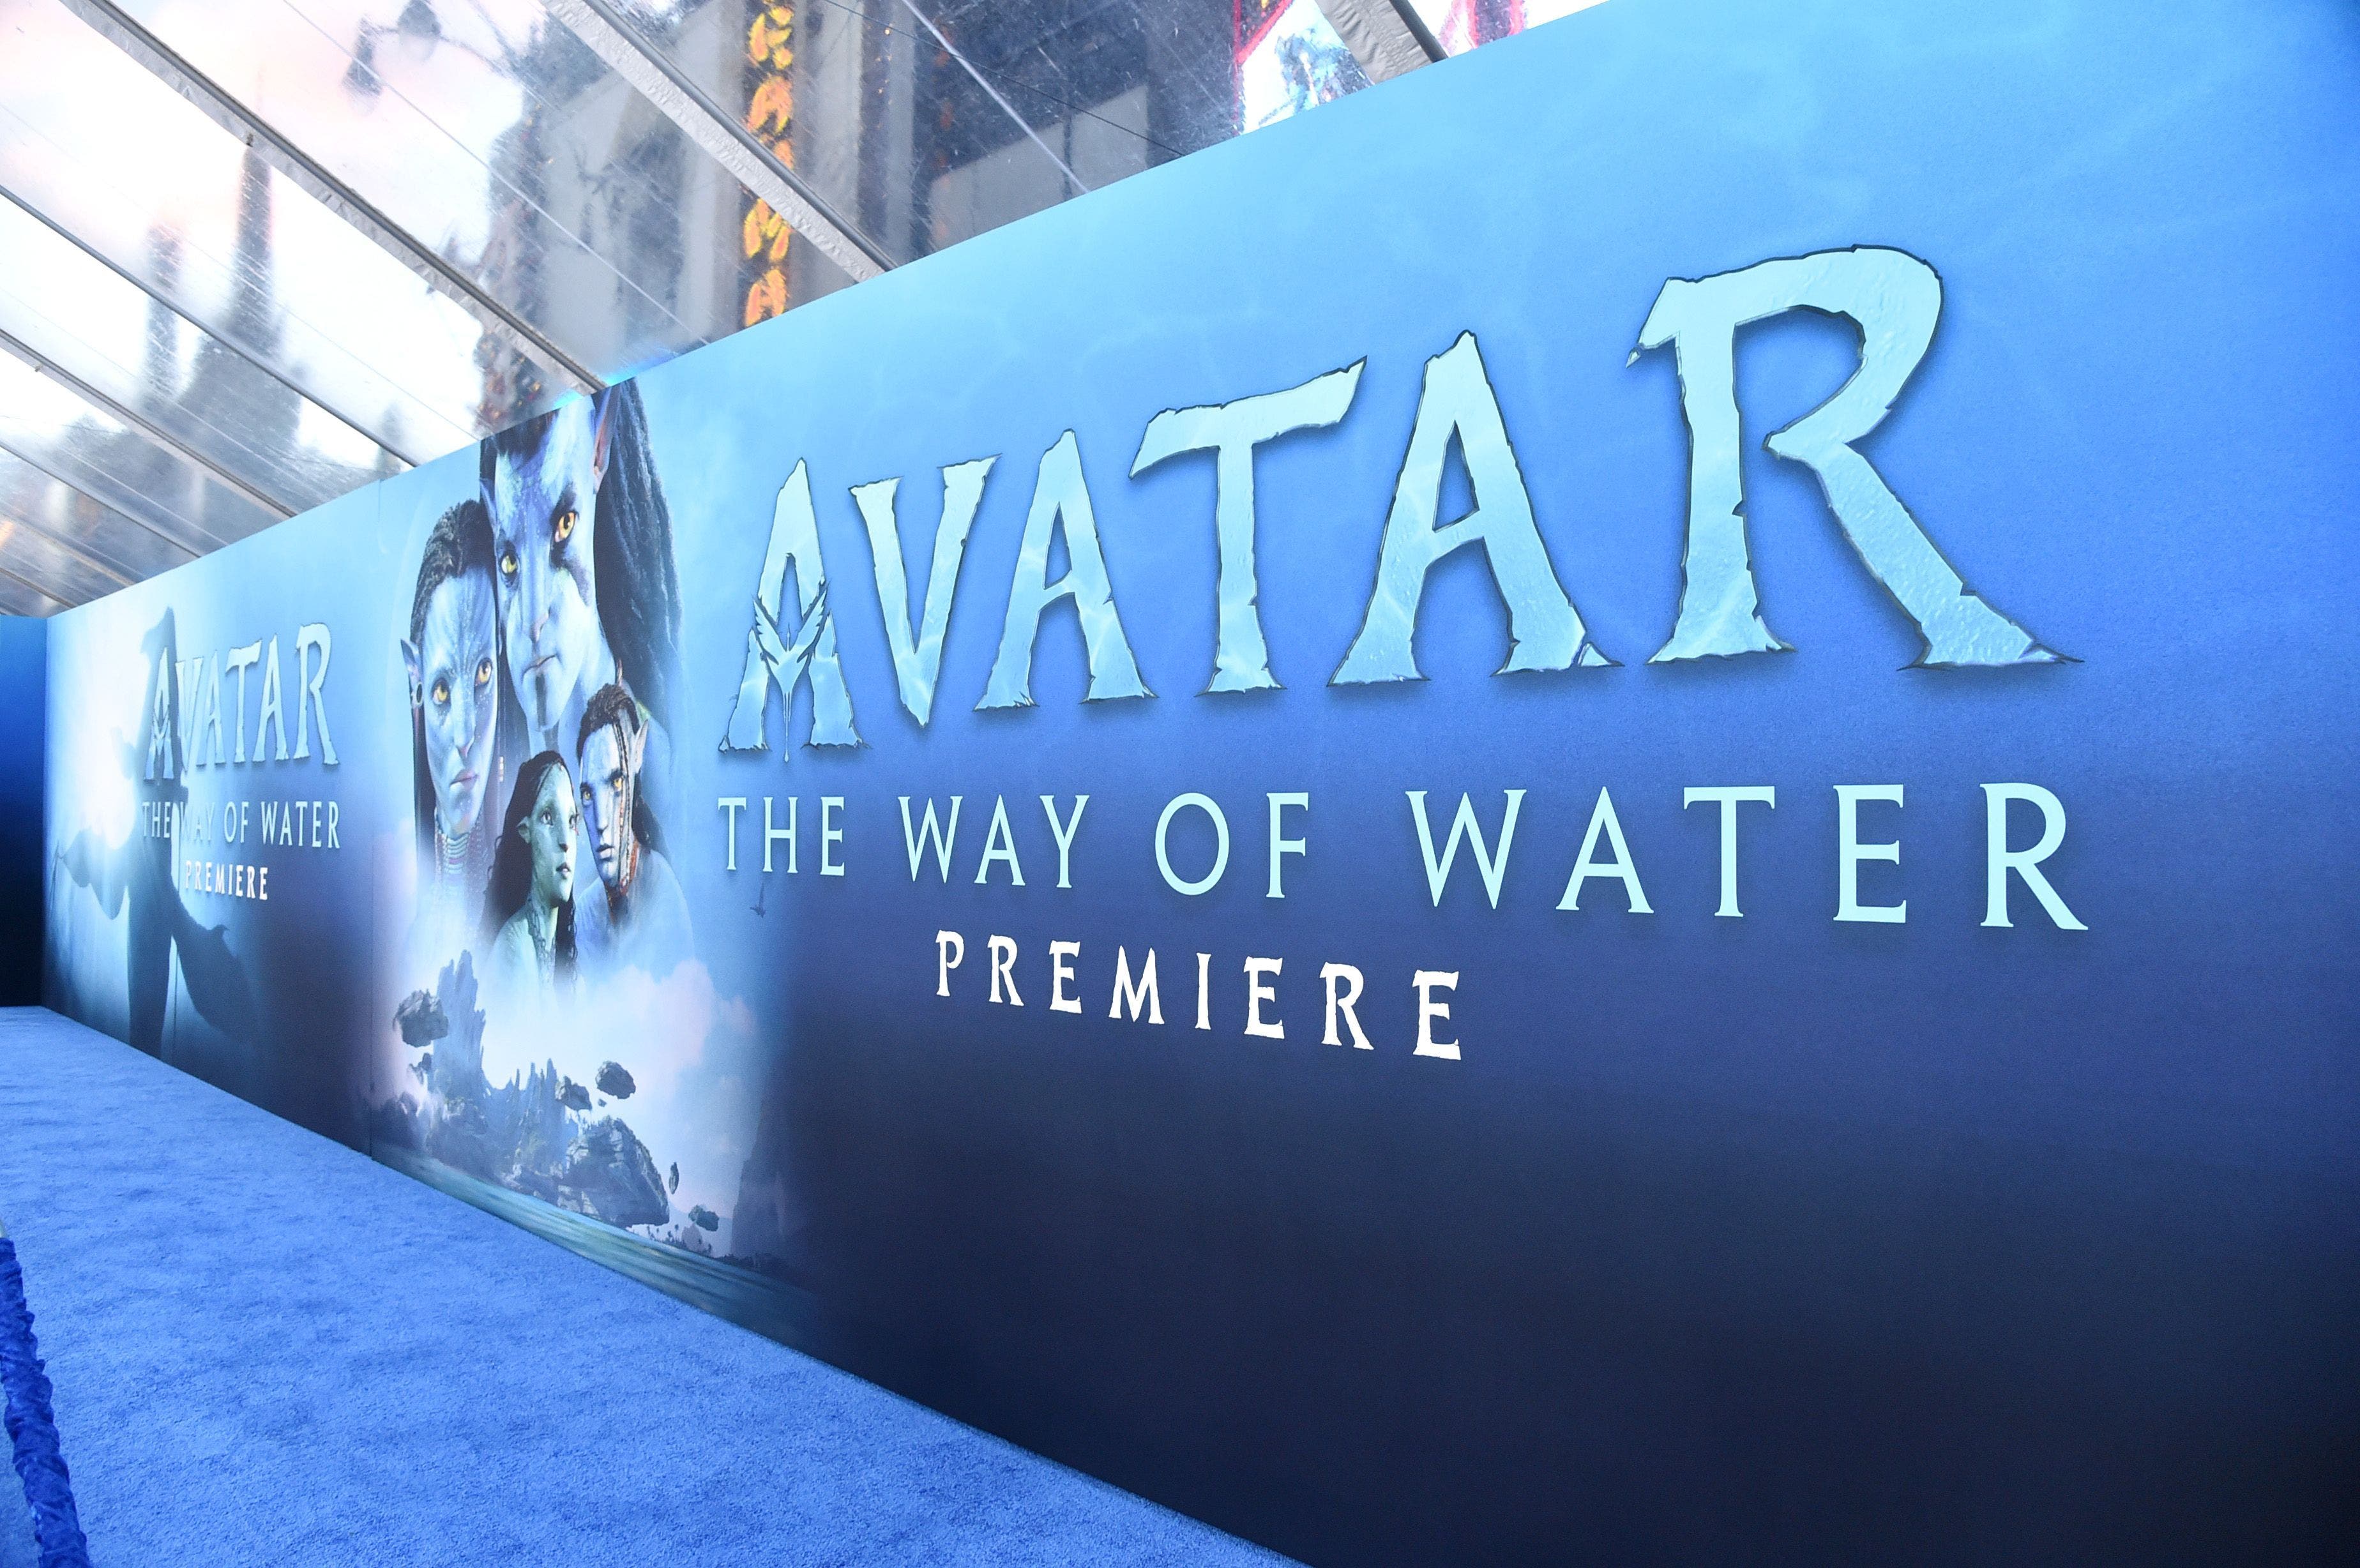 'Avatar: The Way of Water' is about to hit theaters. Are Americans ready for the long-awaited sequel?